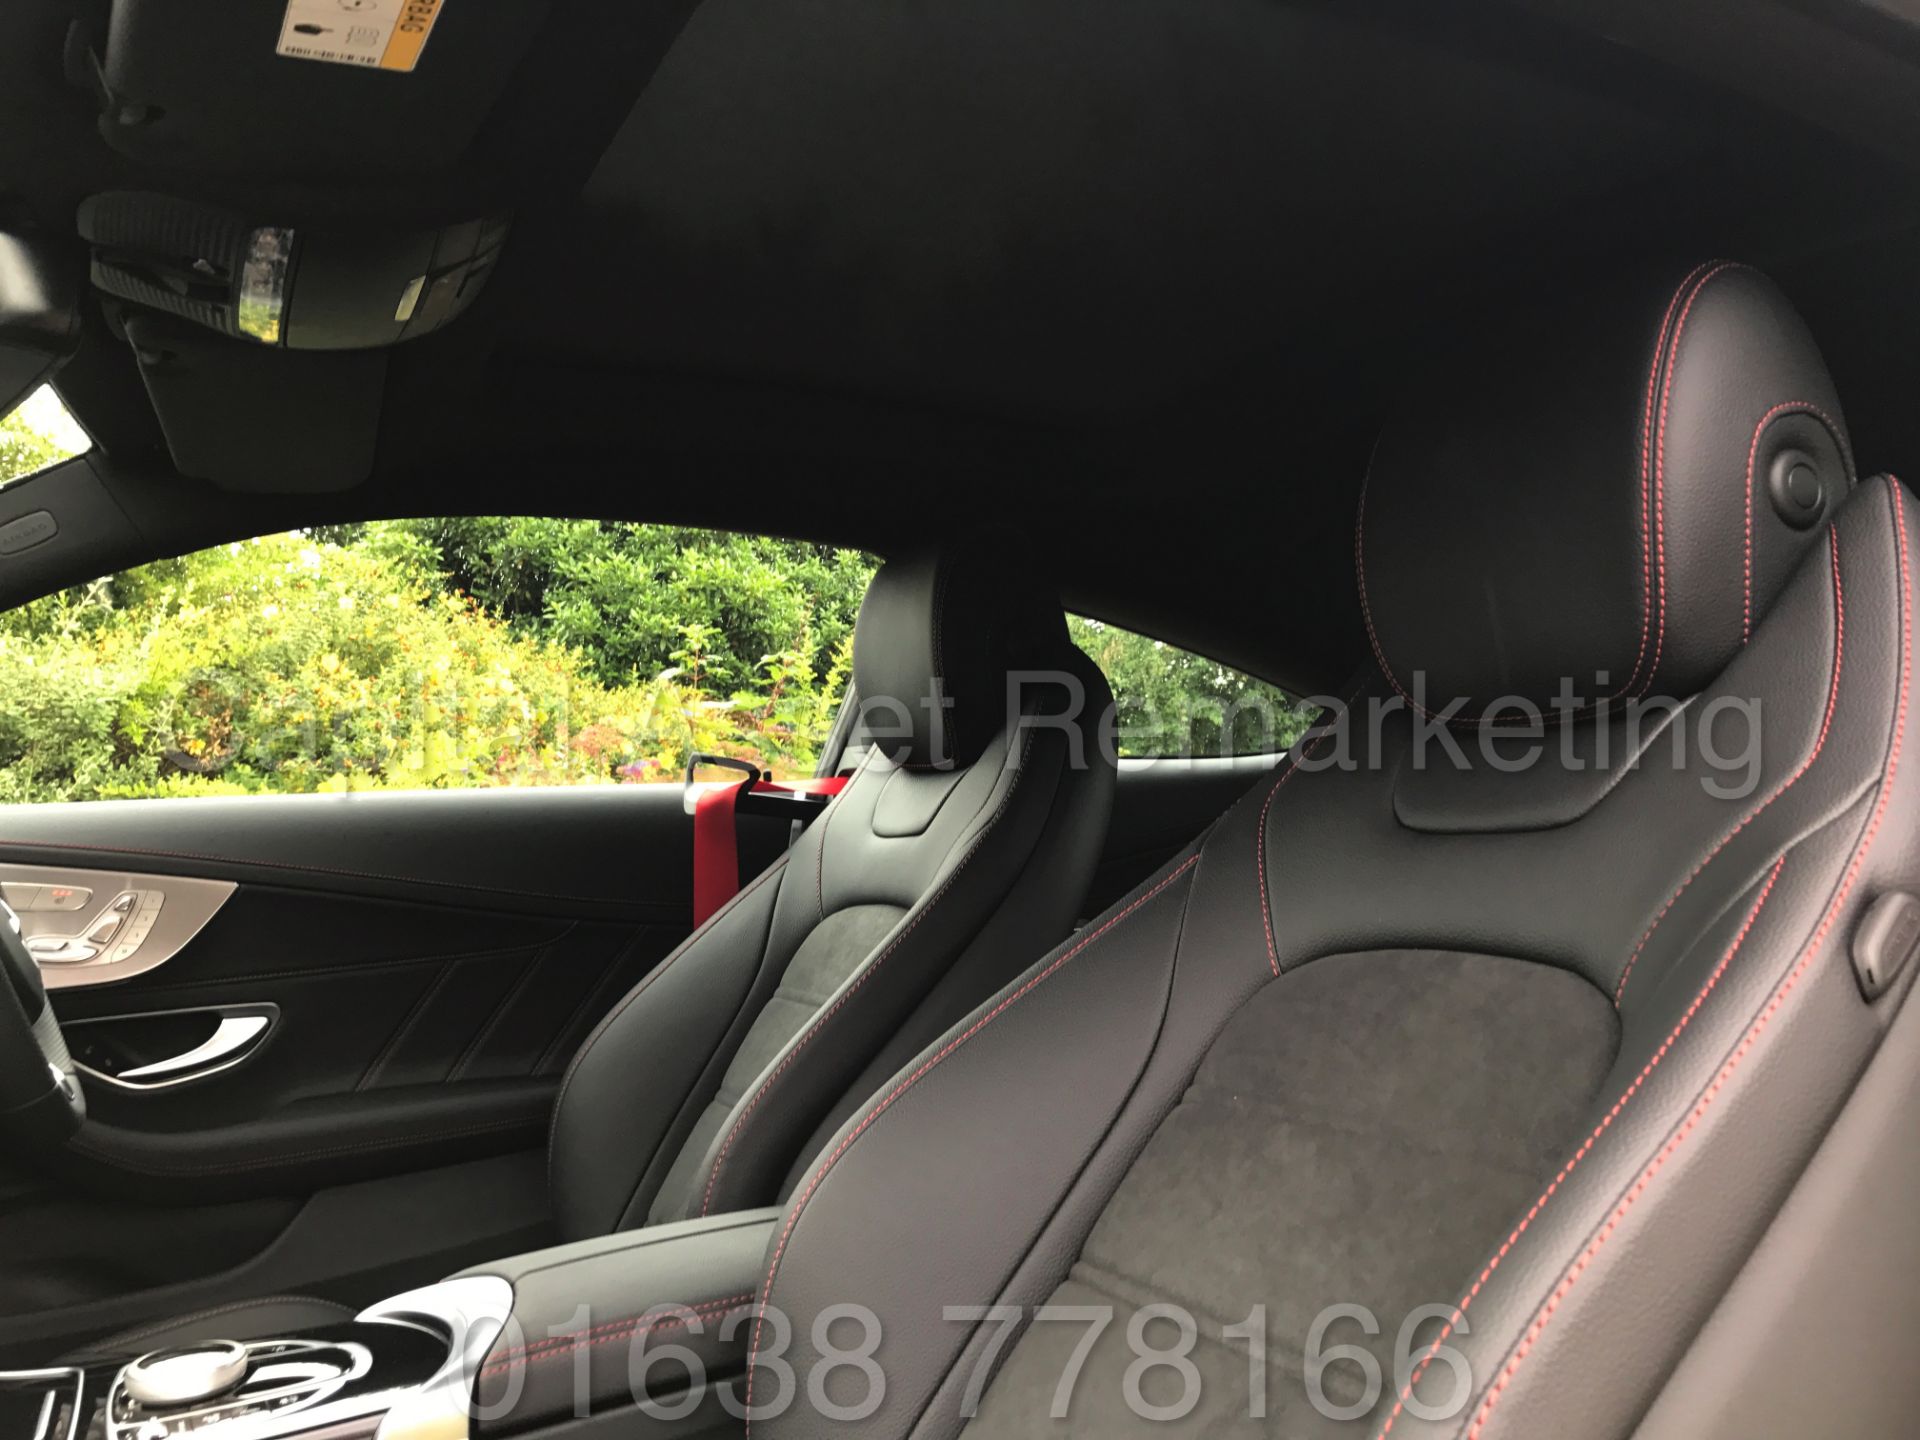 MEREDES-BENZ C43 AMG PREMIUM '4 MATIC' COUPE (2017) '9-G AUTO - LEATHER - SAT NAV' **FULLY LOADED** - Image 48 of 57